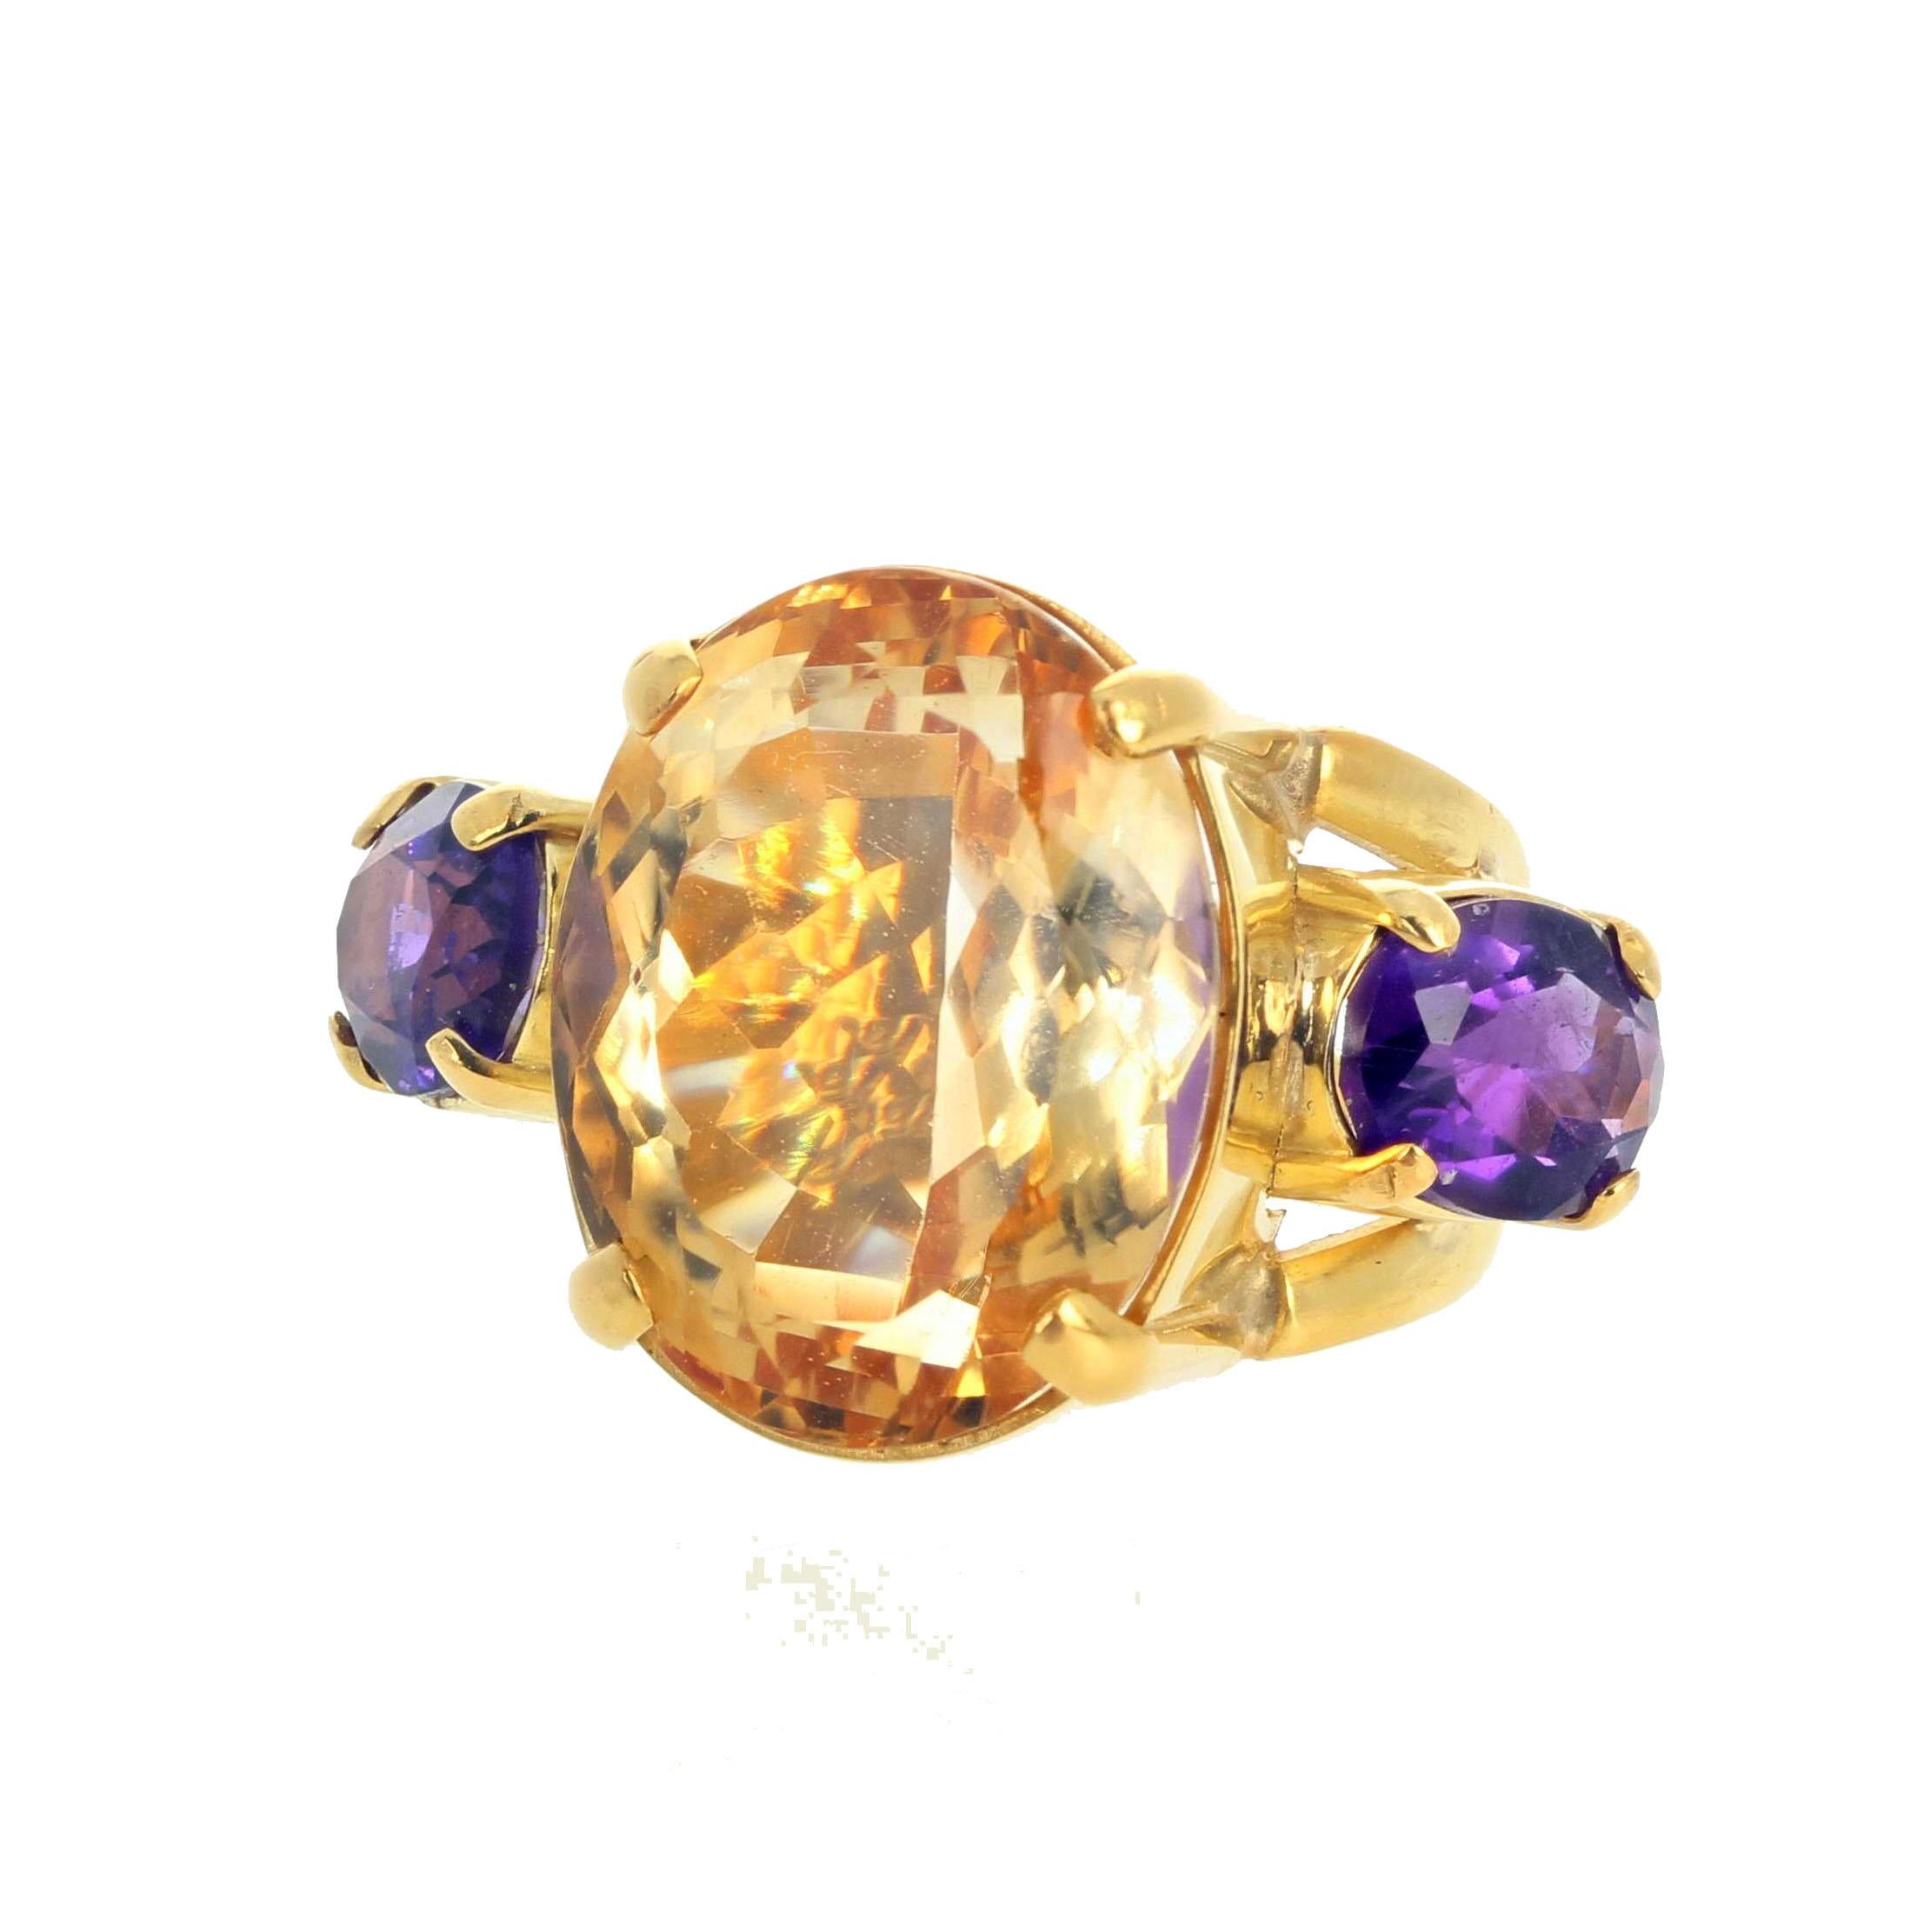 Women's or Men's AJD Gloriously Beautiful 26Ct Citrine & Amethyst Impressive 18K Yellow Gold Ring For Sale